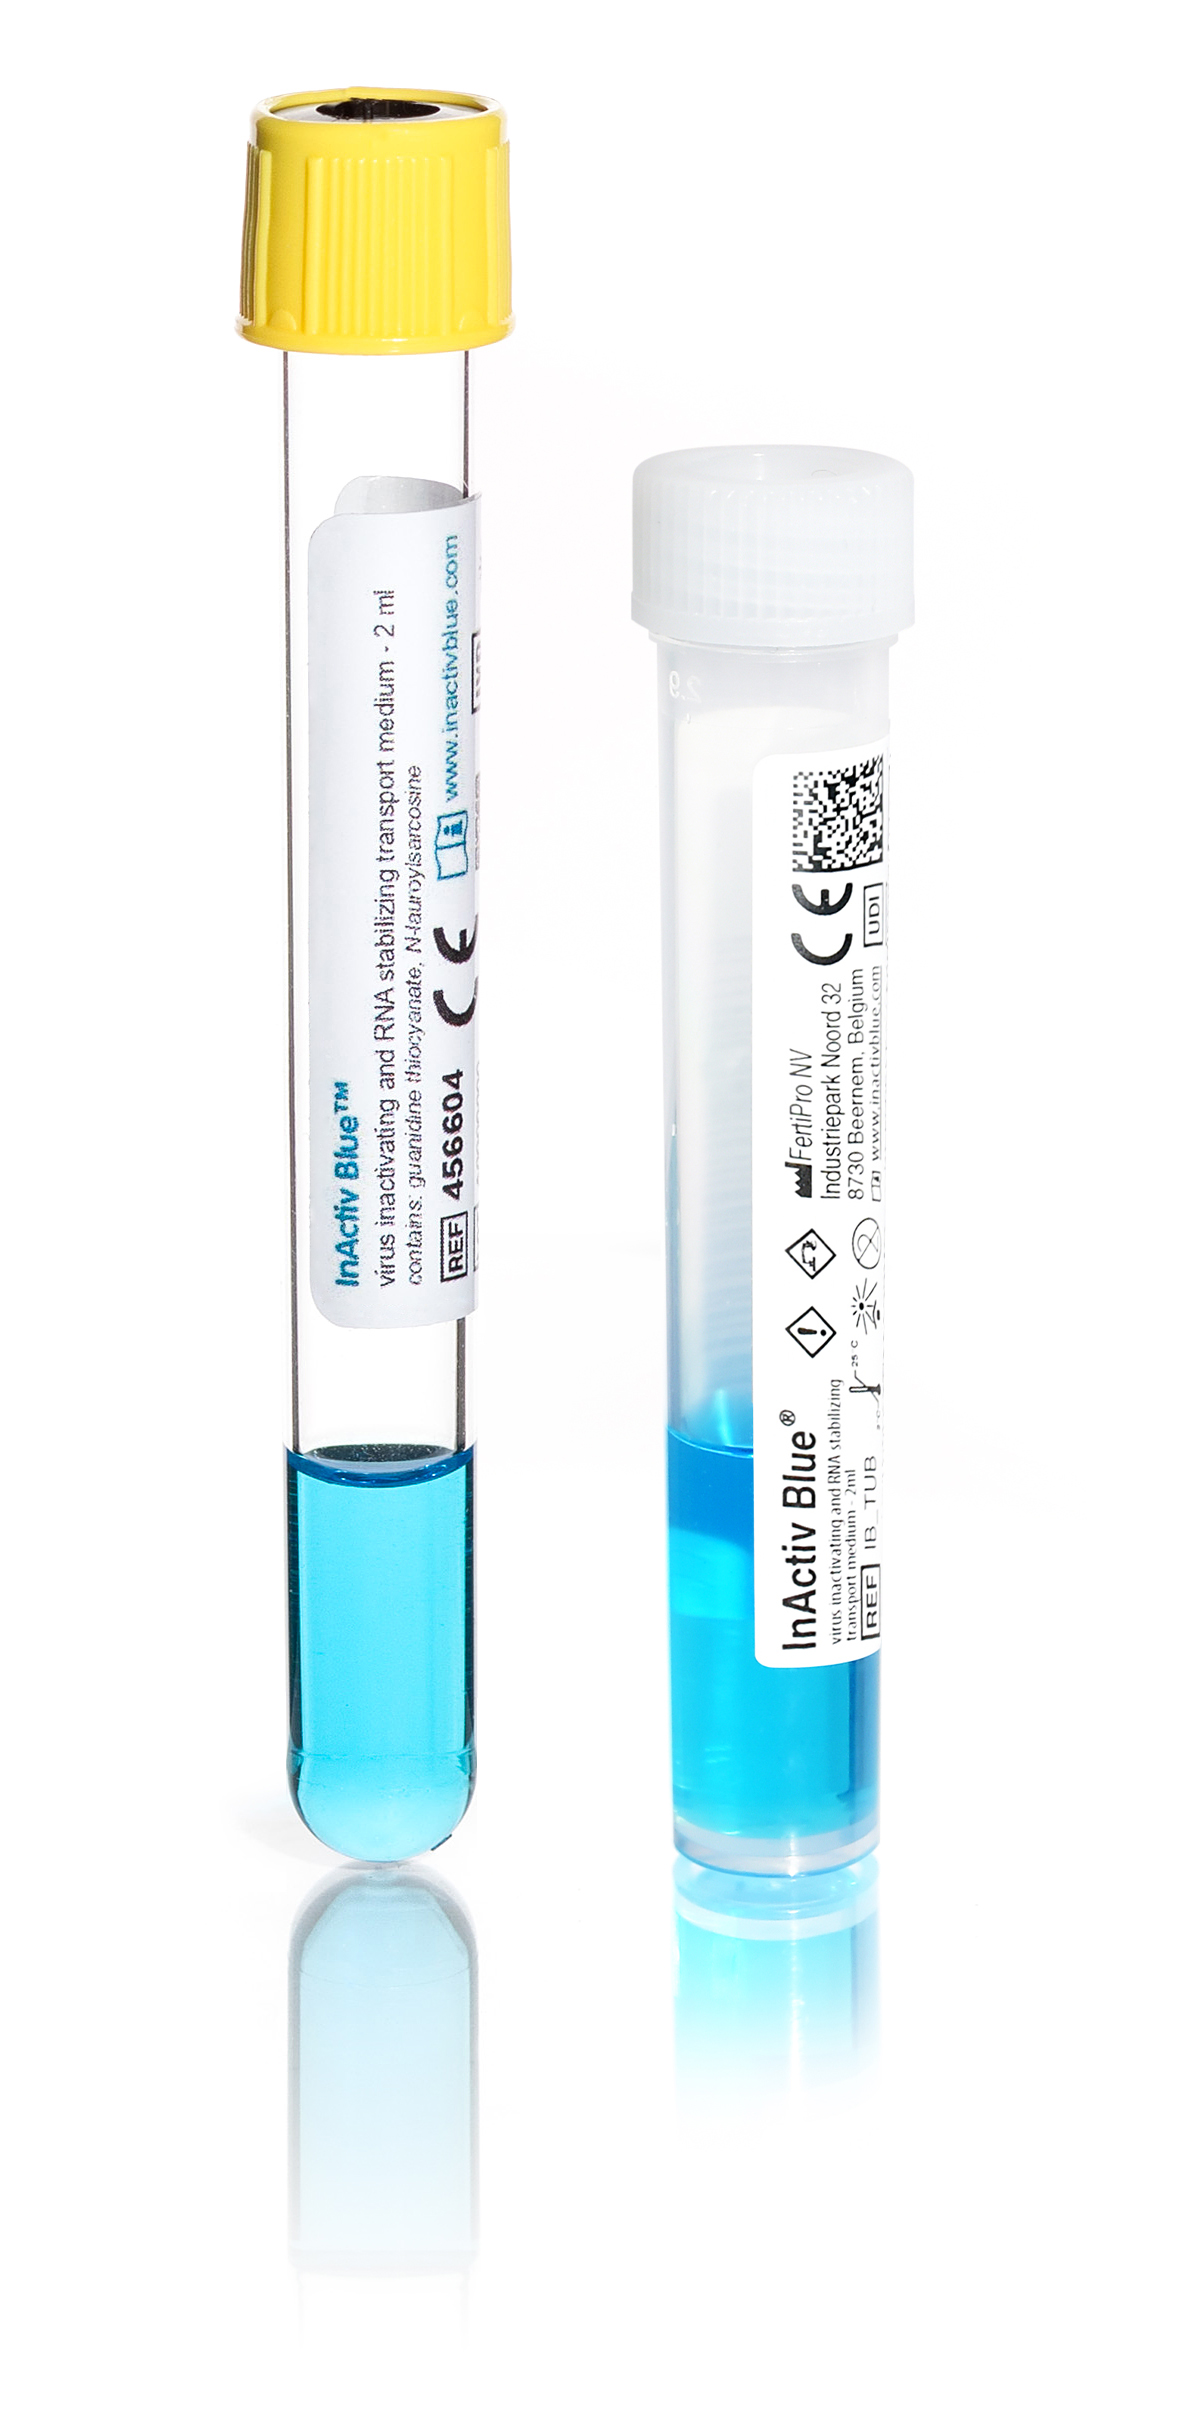 InActiv Blue tubes